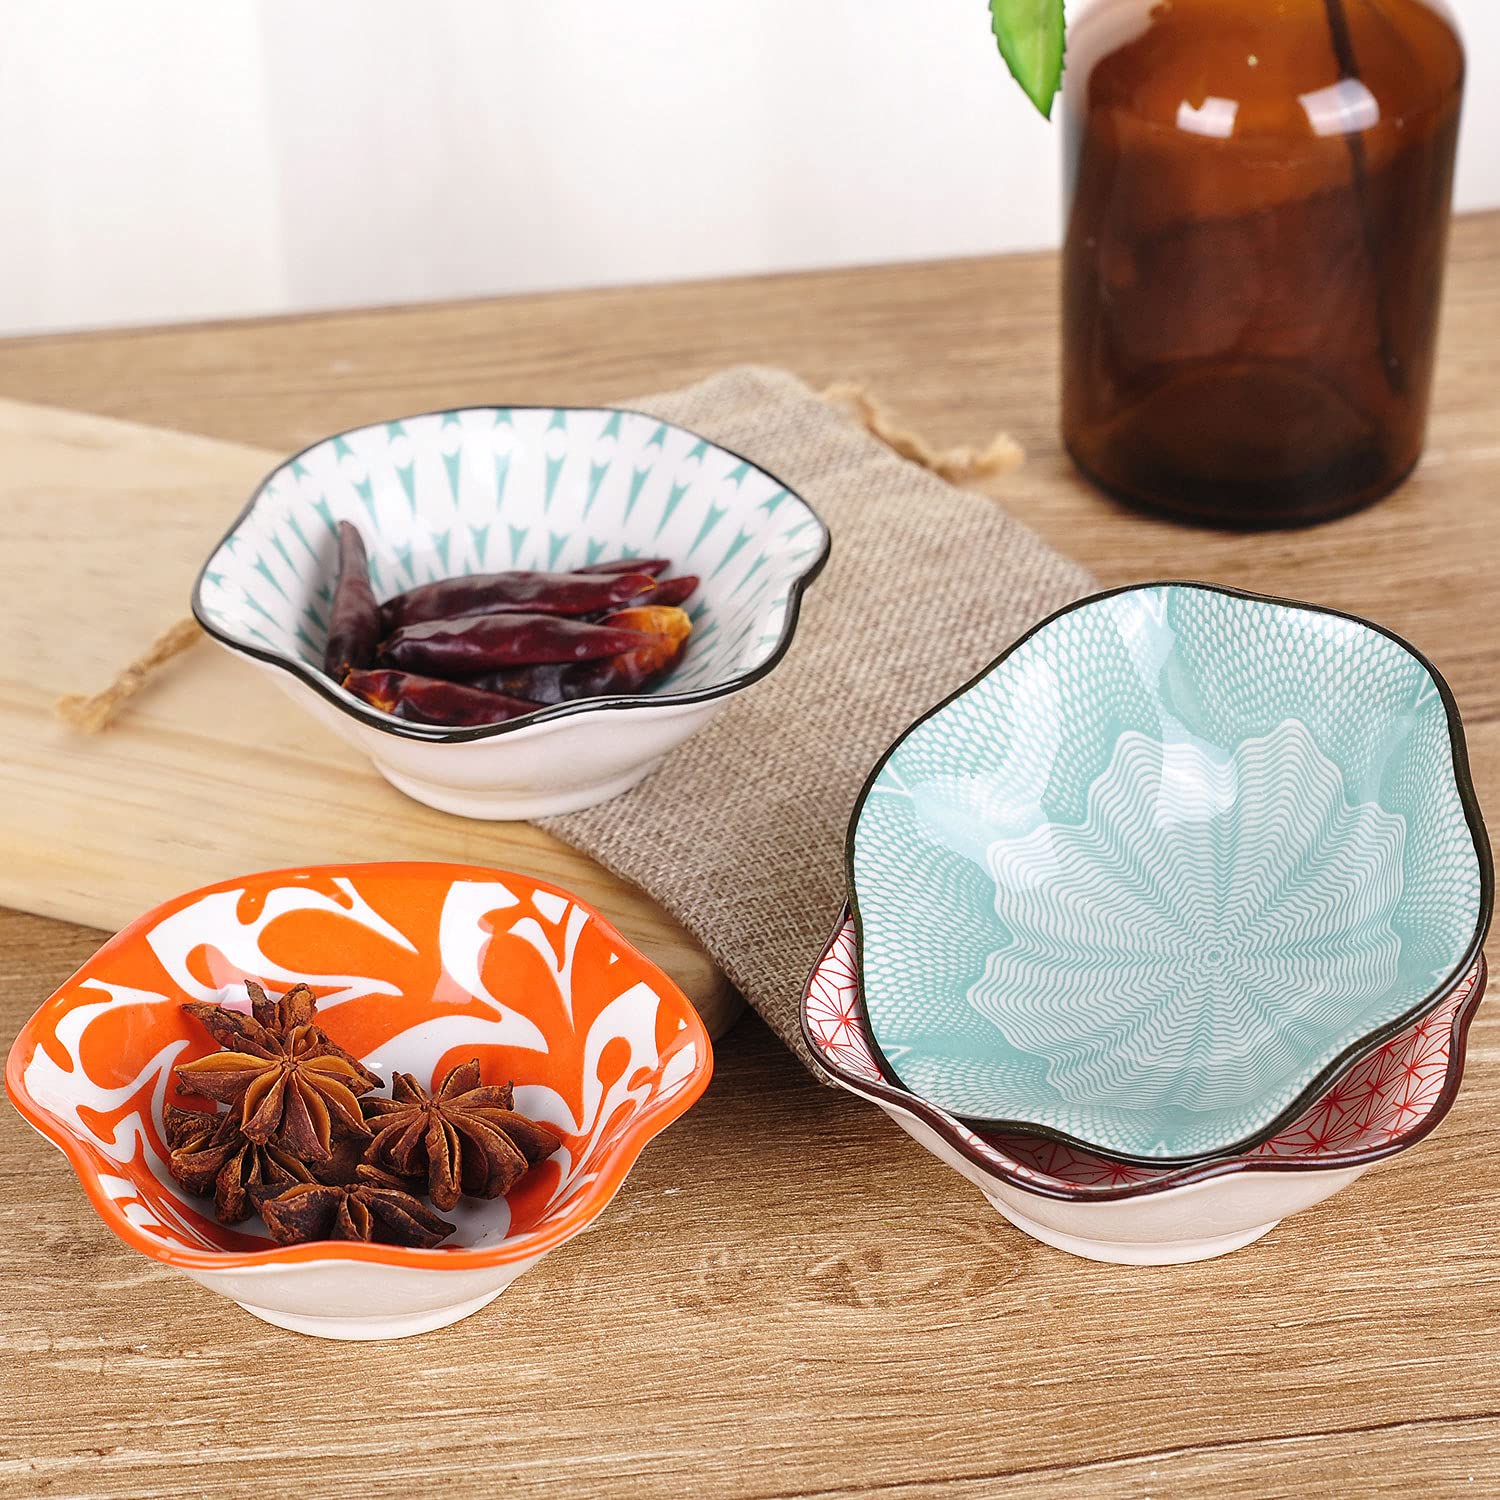 VanEnjoy Modern Style Ceramic Japanese Dipping Bowl Soy Sauce Seasoning Dishes Soy Dipping Sauce Dishes Set of 4